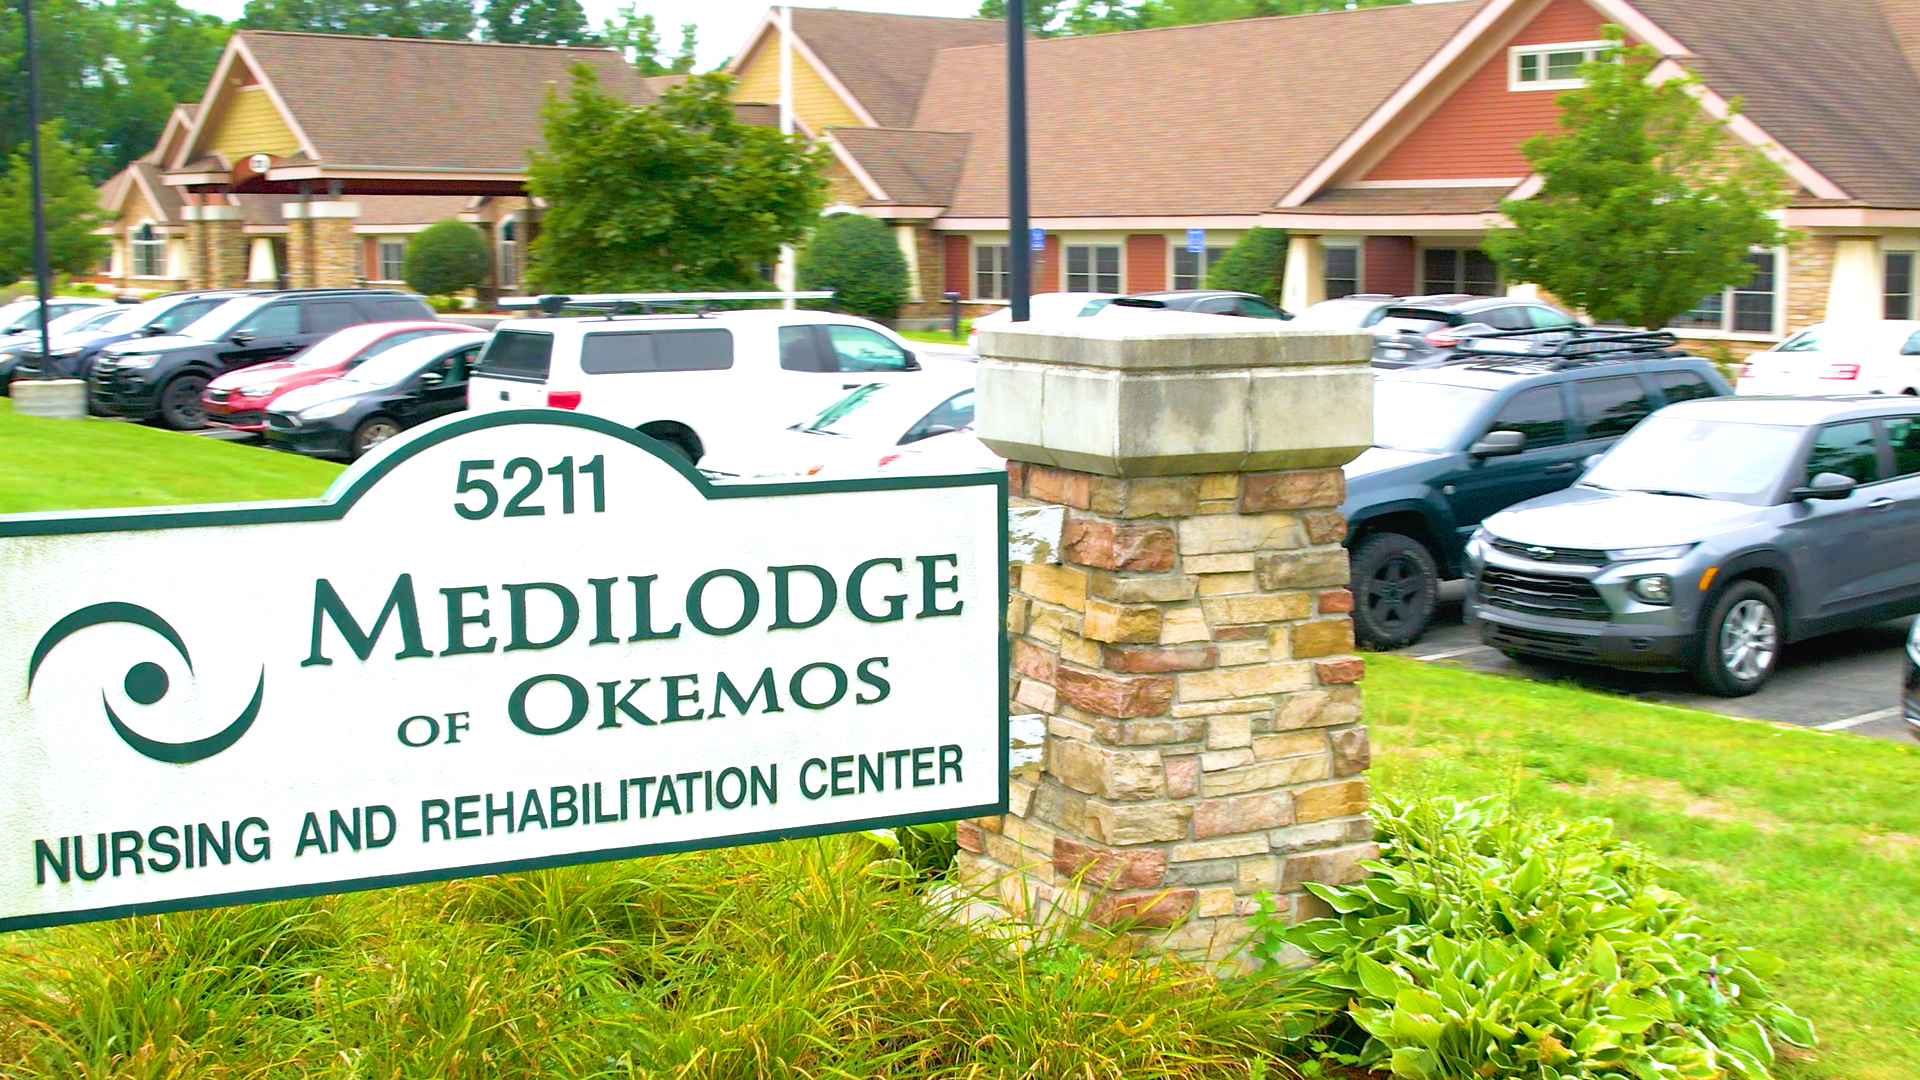 Medilodge of Okemos Sign in front of the building.